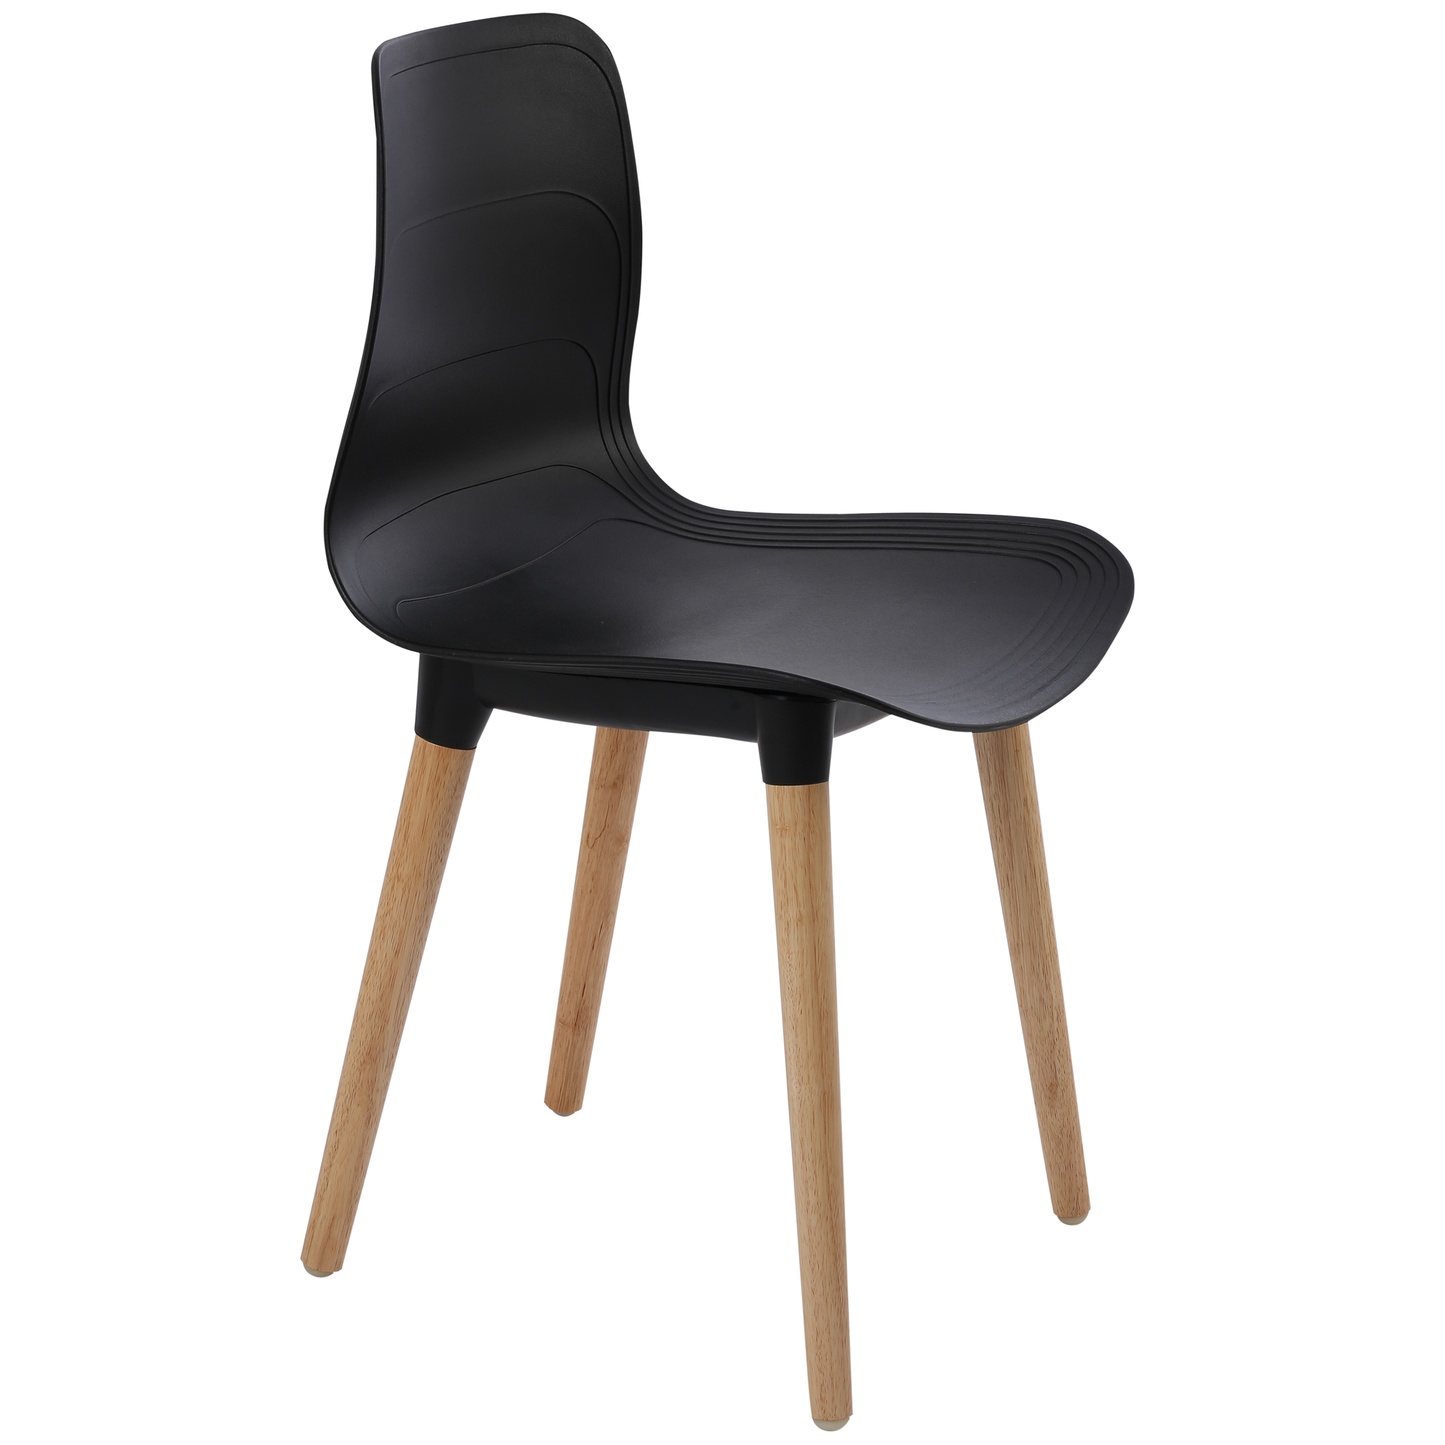 Plastic Chairs With Wood Legs For Cafe and Dining HIFUWA-G (Black)